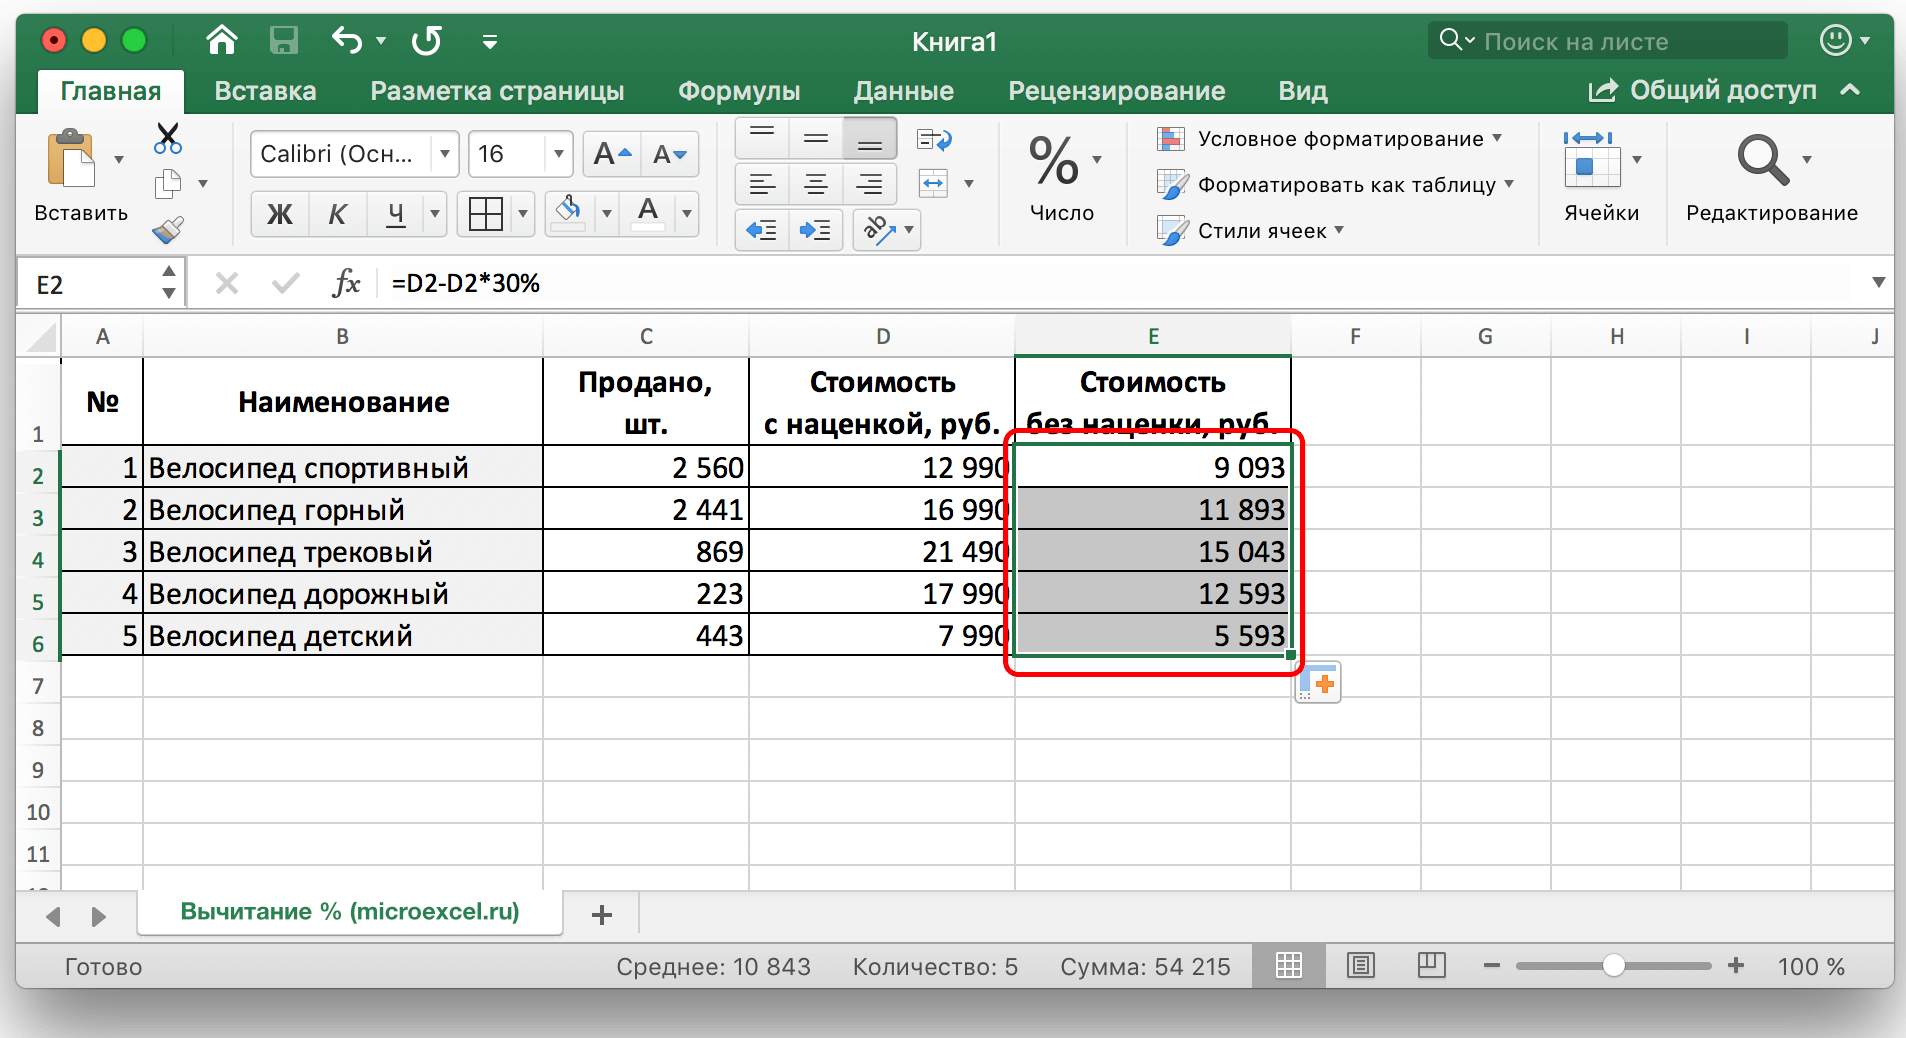 Lesson on subtracting percentages from a number in Excel